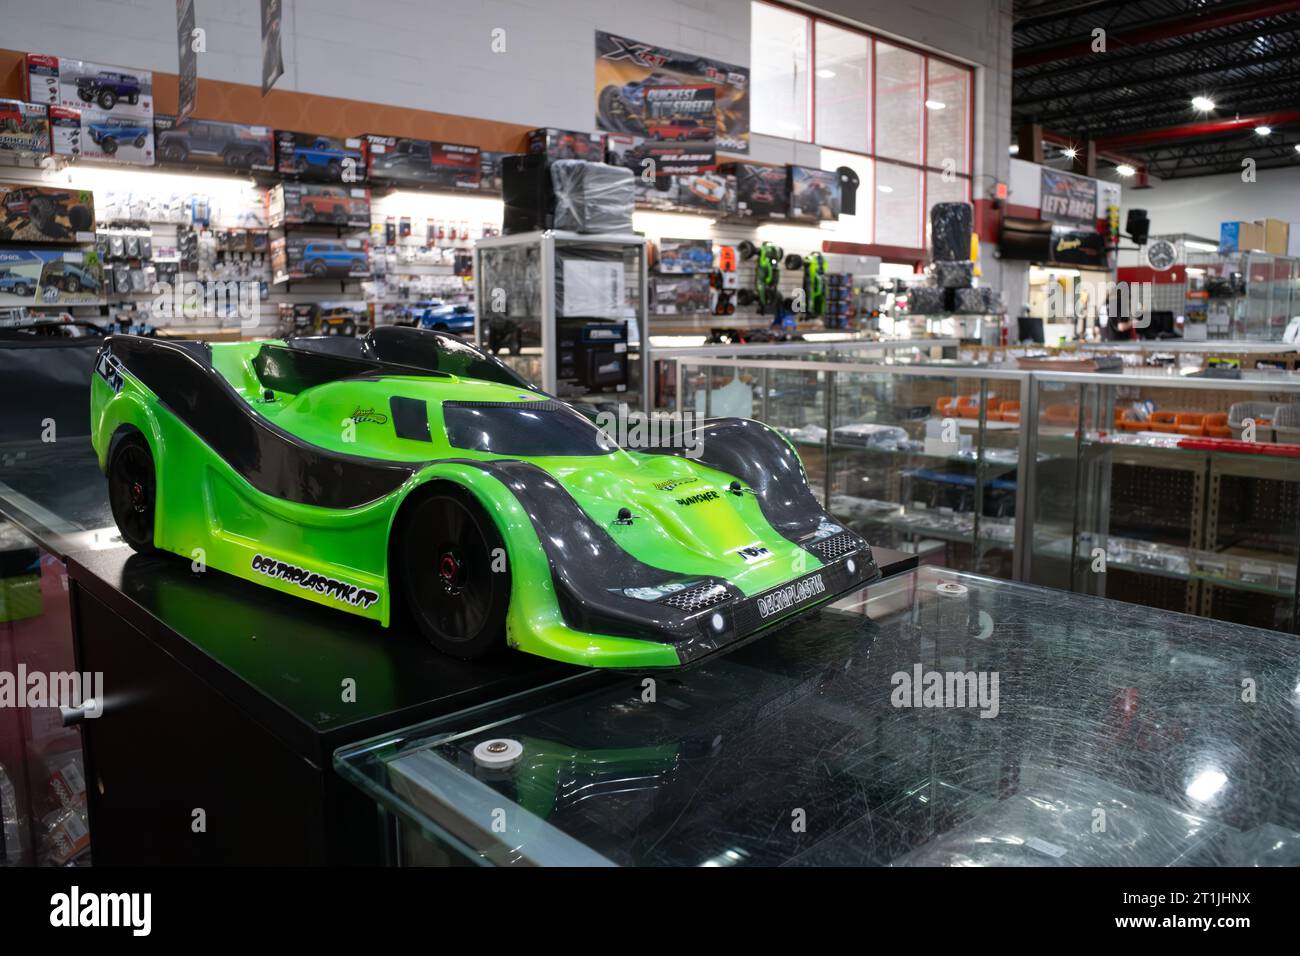 RC car on display at a radio control hobby specialist store Stock Photo